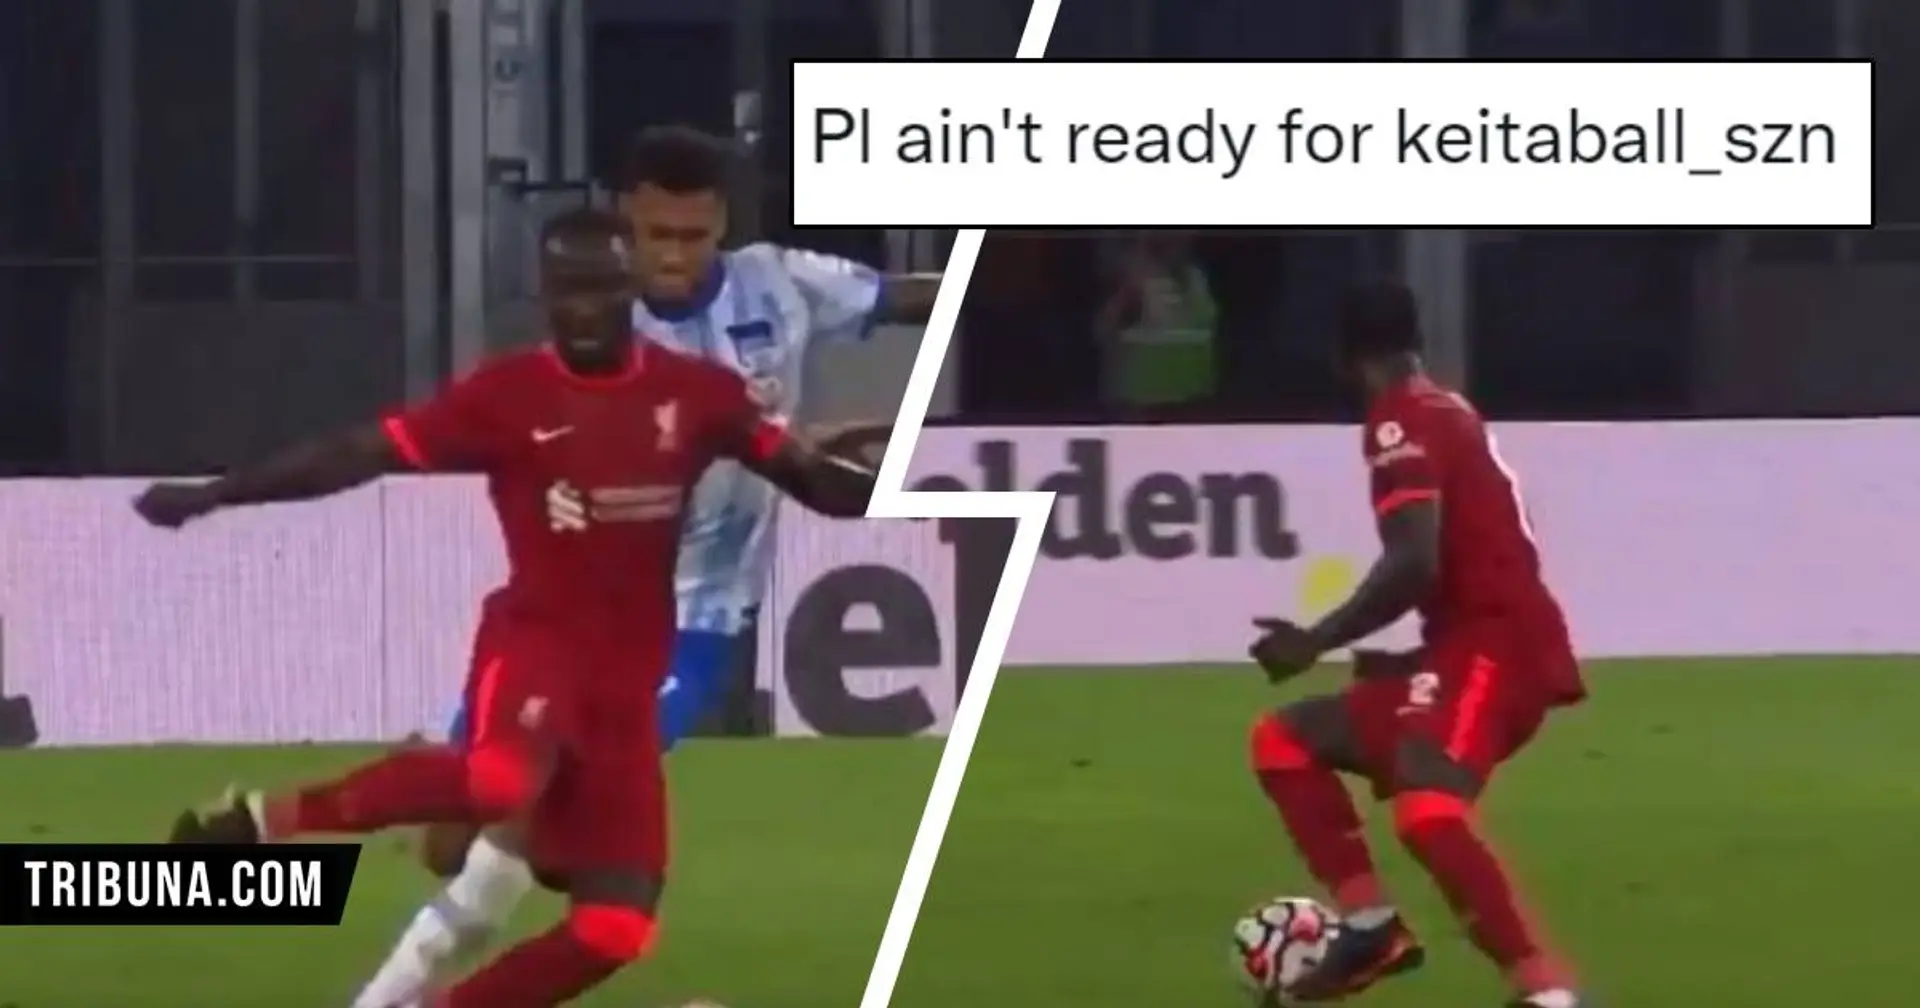 Silky smooth: Taking closer look at Keita's wonderful dummy move as he totally schools his defender